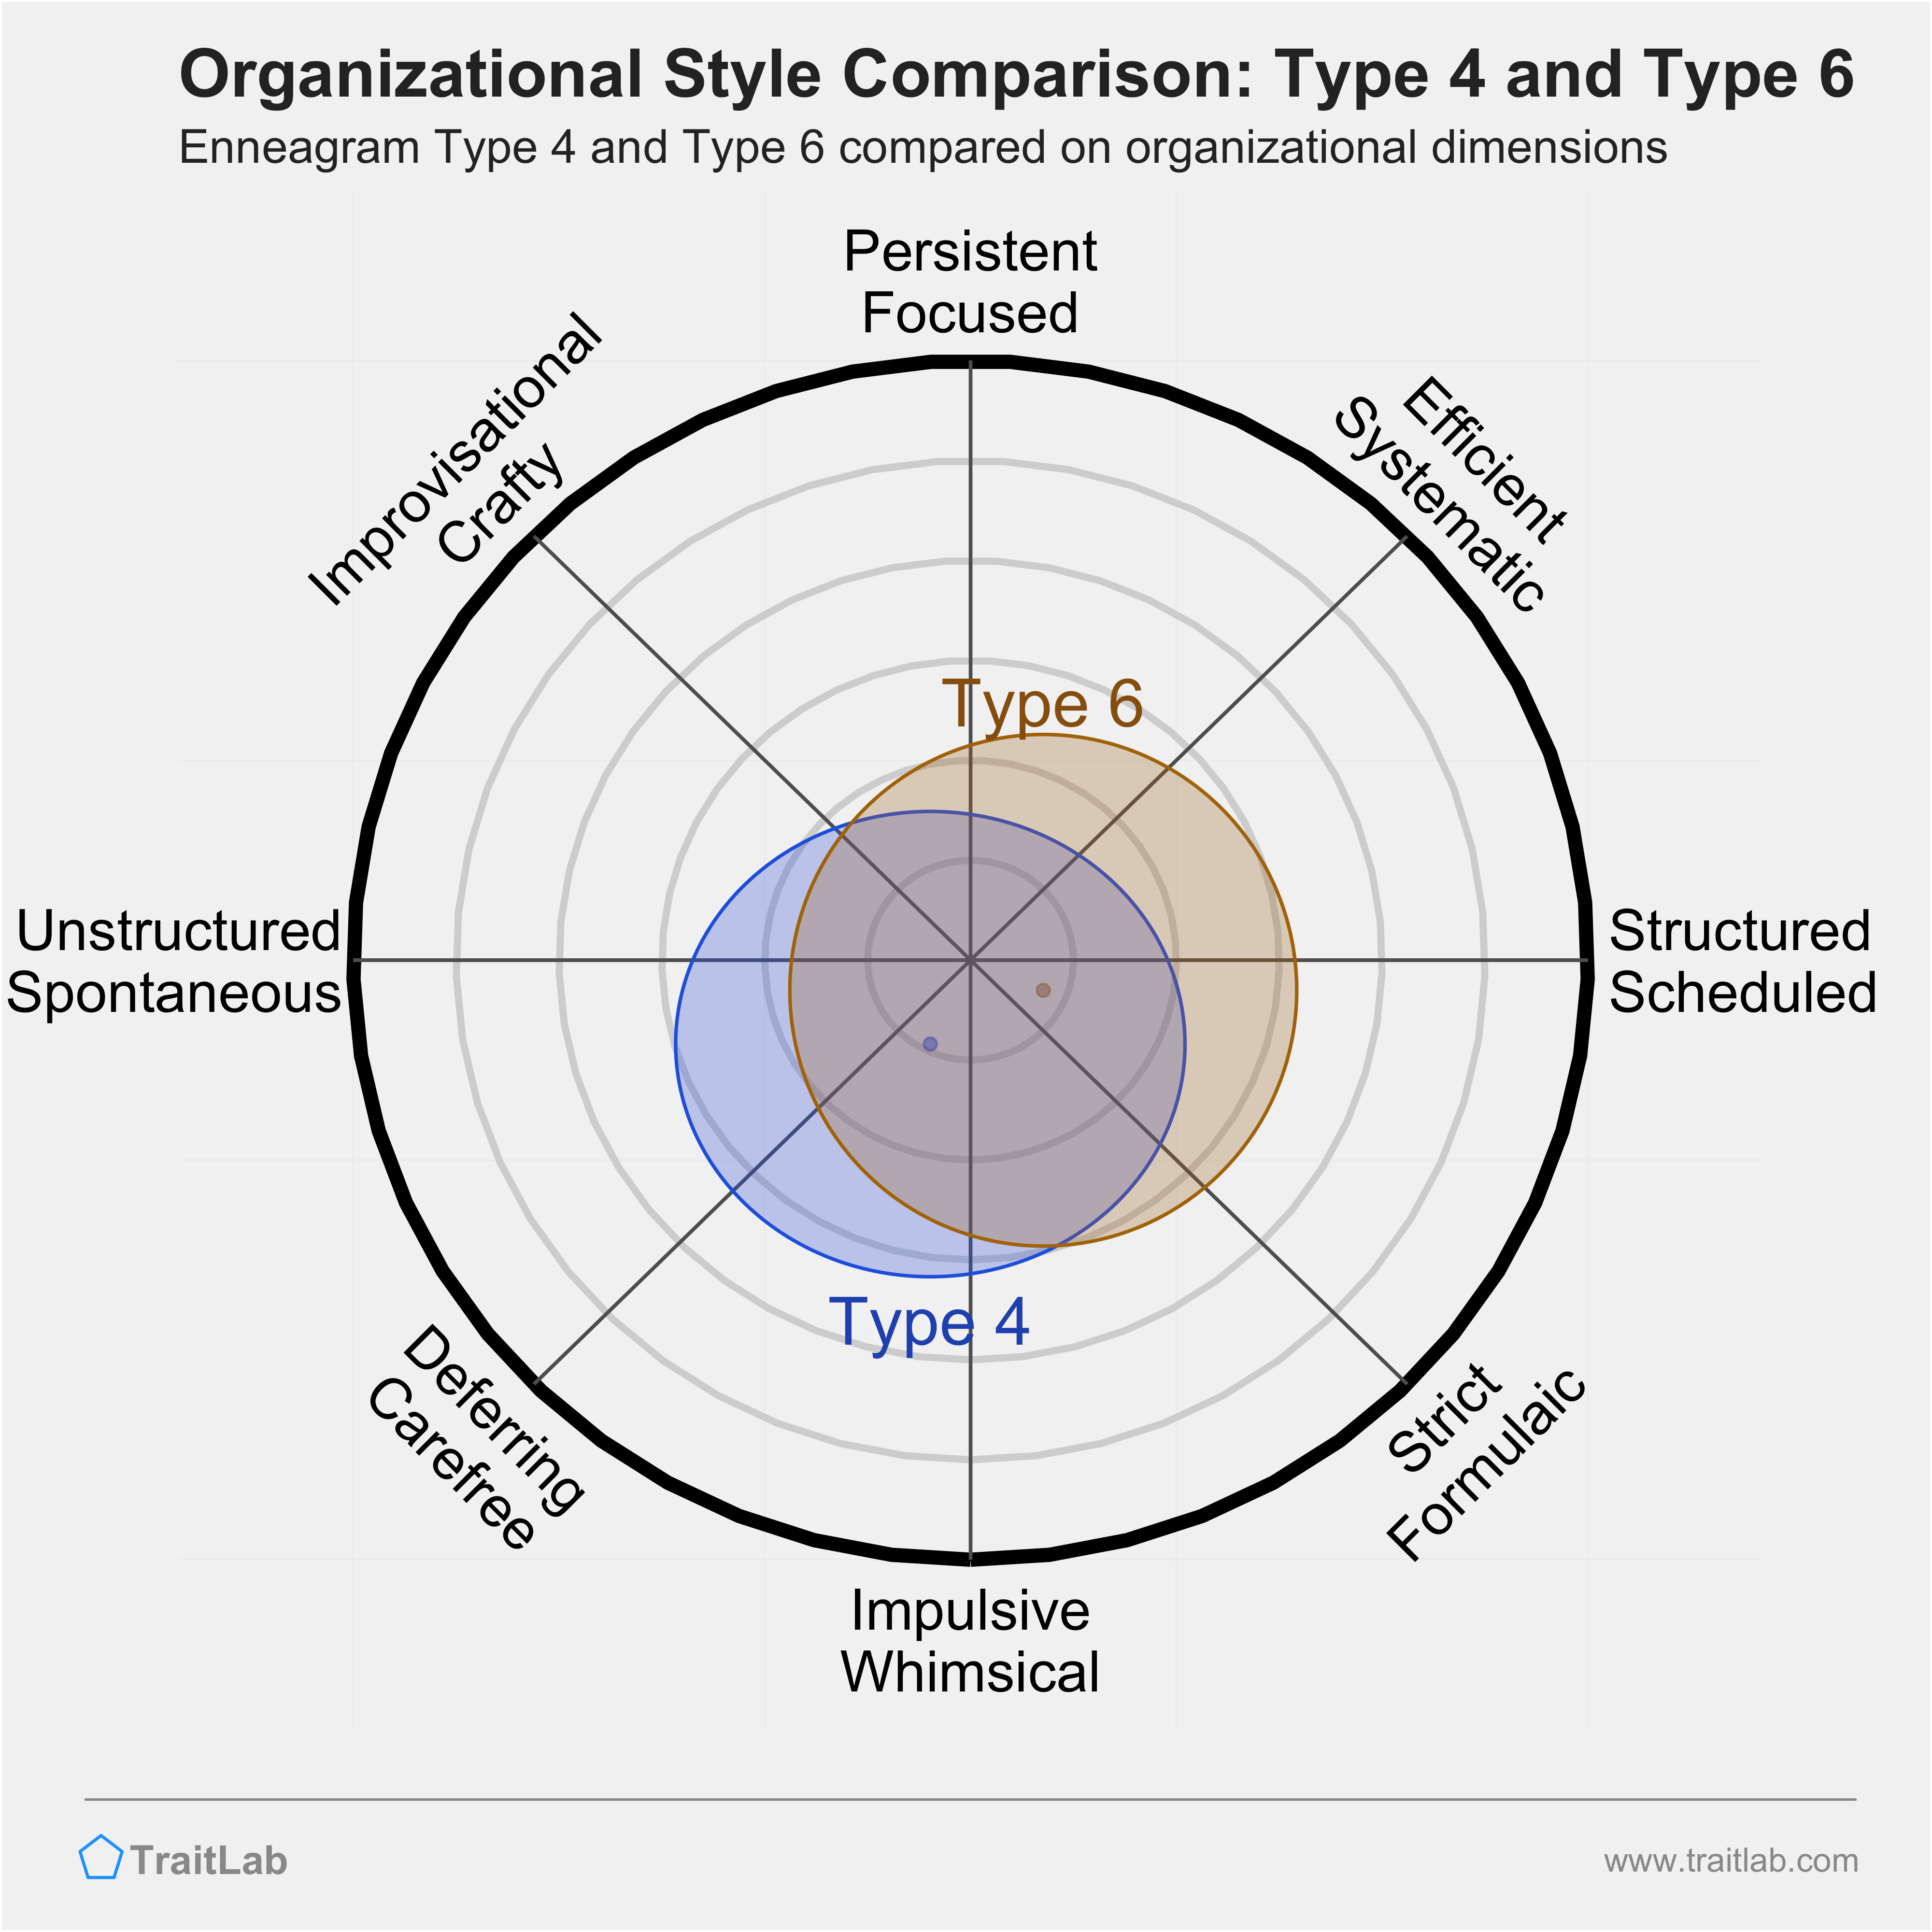 Type 4 and Type 6 comparison across organizational dimensions